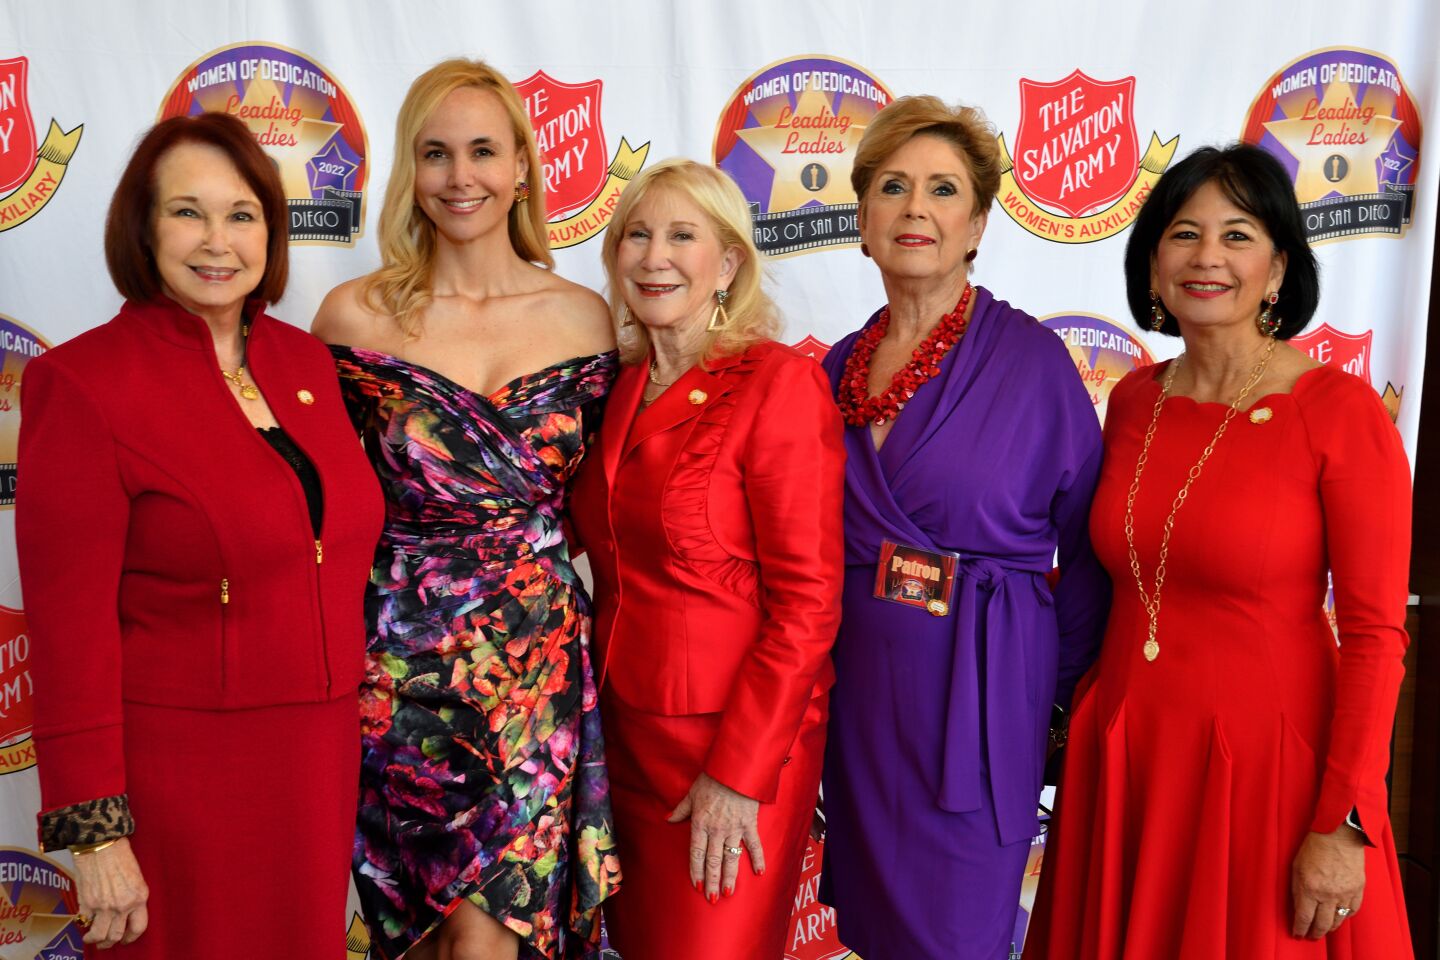 Women of Dedication luncheon co-chairwomen Clarice Perkins, Danitza Villanueva and Roxi Link attend the event with Salvation Army Women’s Auxiliary President Judy Burer and Vice President Dee Ammon.